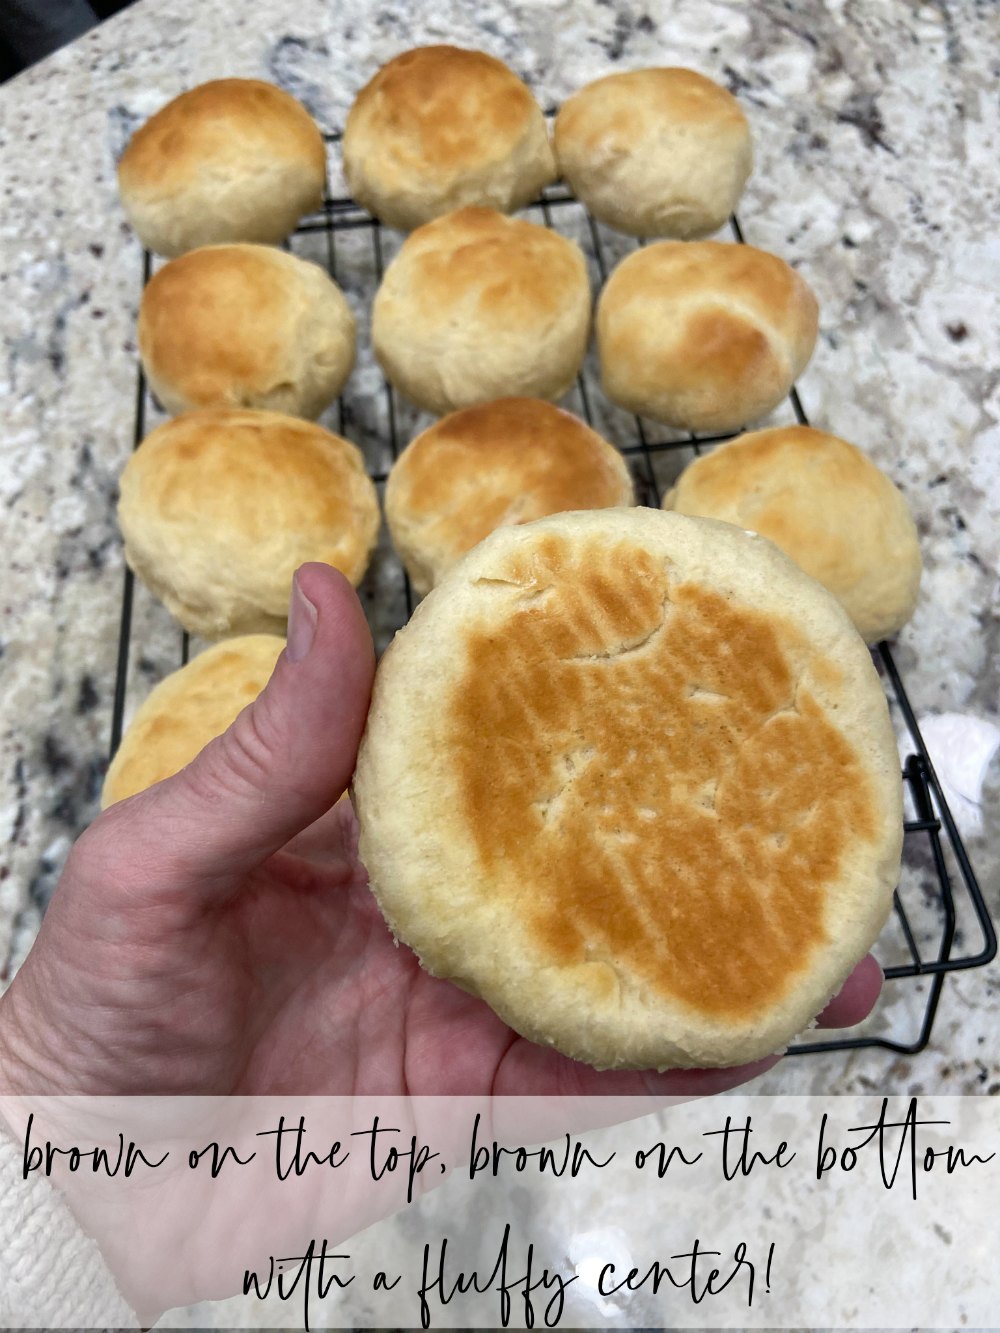 Fast and Easy Homemade Hamburger Buns in Less Than an Hour. Need a quick hamburger bun without having to run to the store? These are easy to make and bake up fluffy and golden brown in less than an hour. 